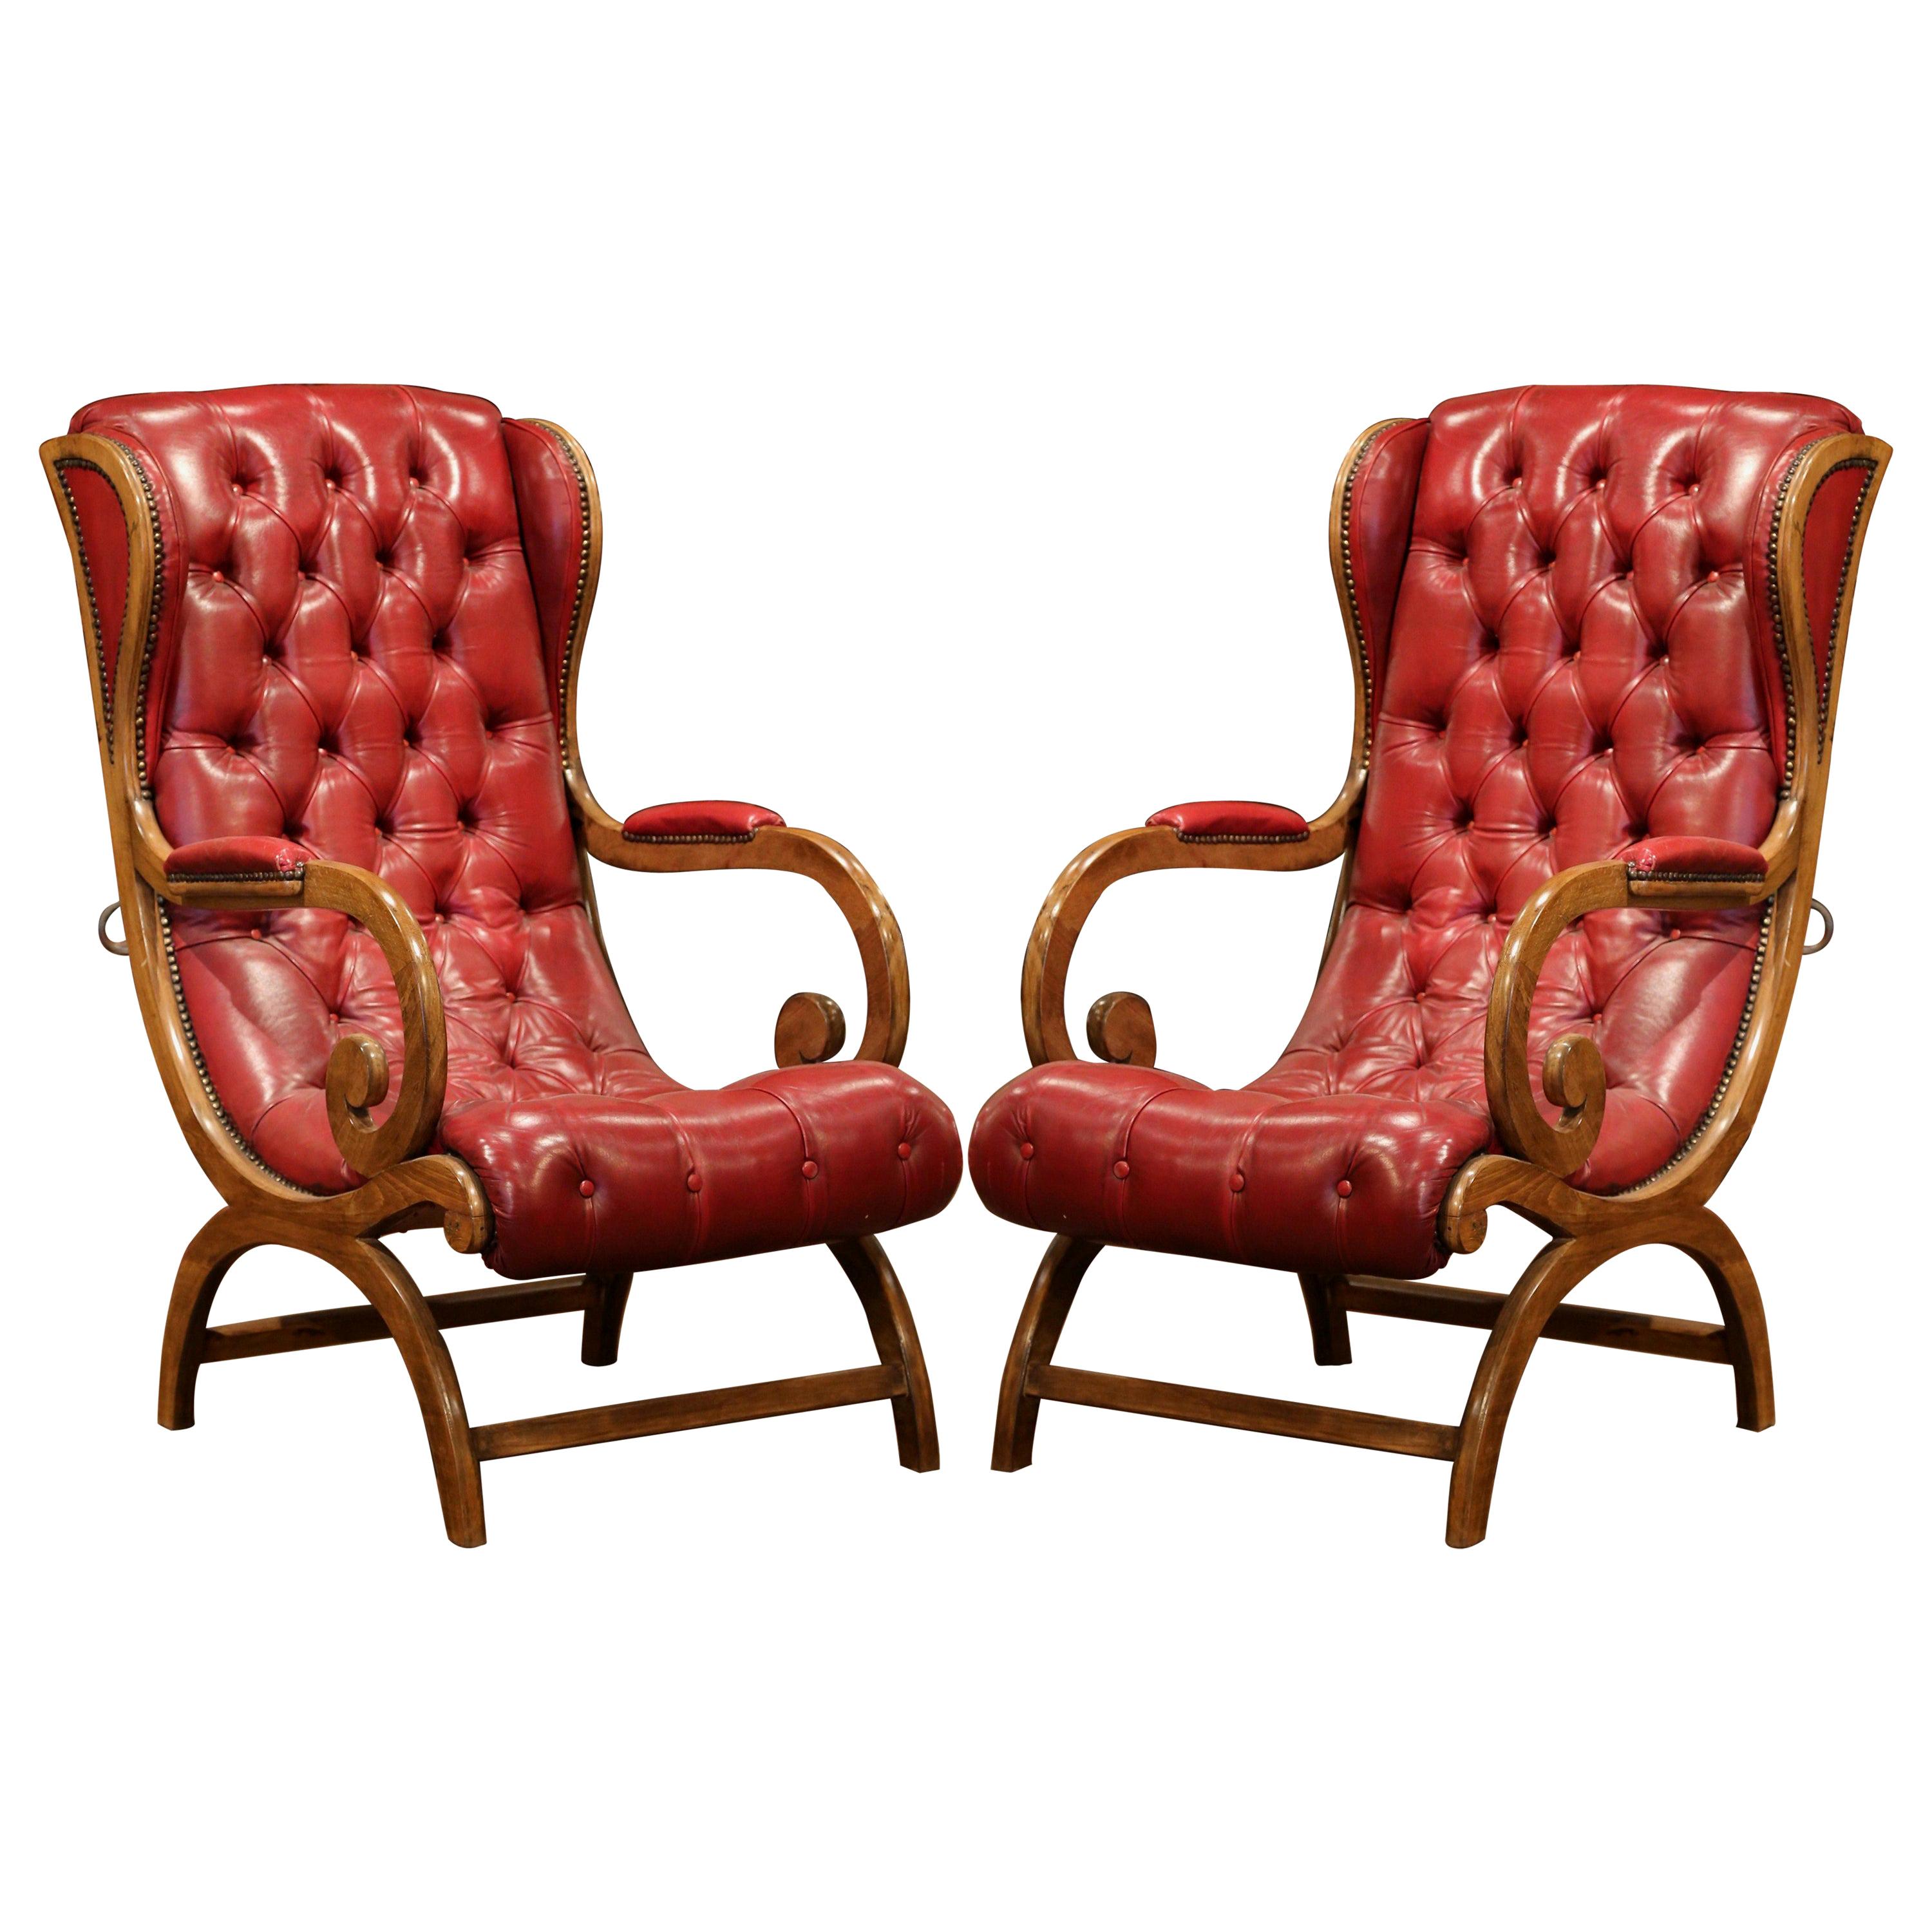 Pair of Midcentury French Carved Walnut Armchairs with Original Red Leather